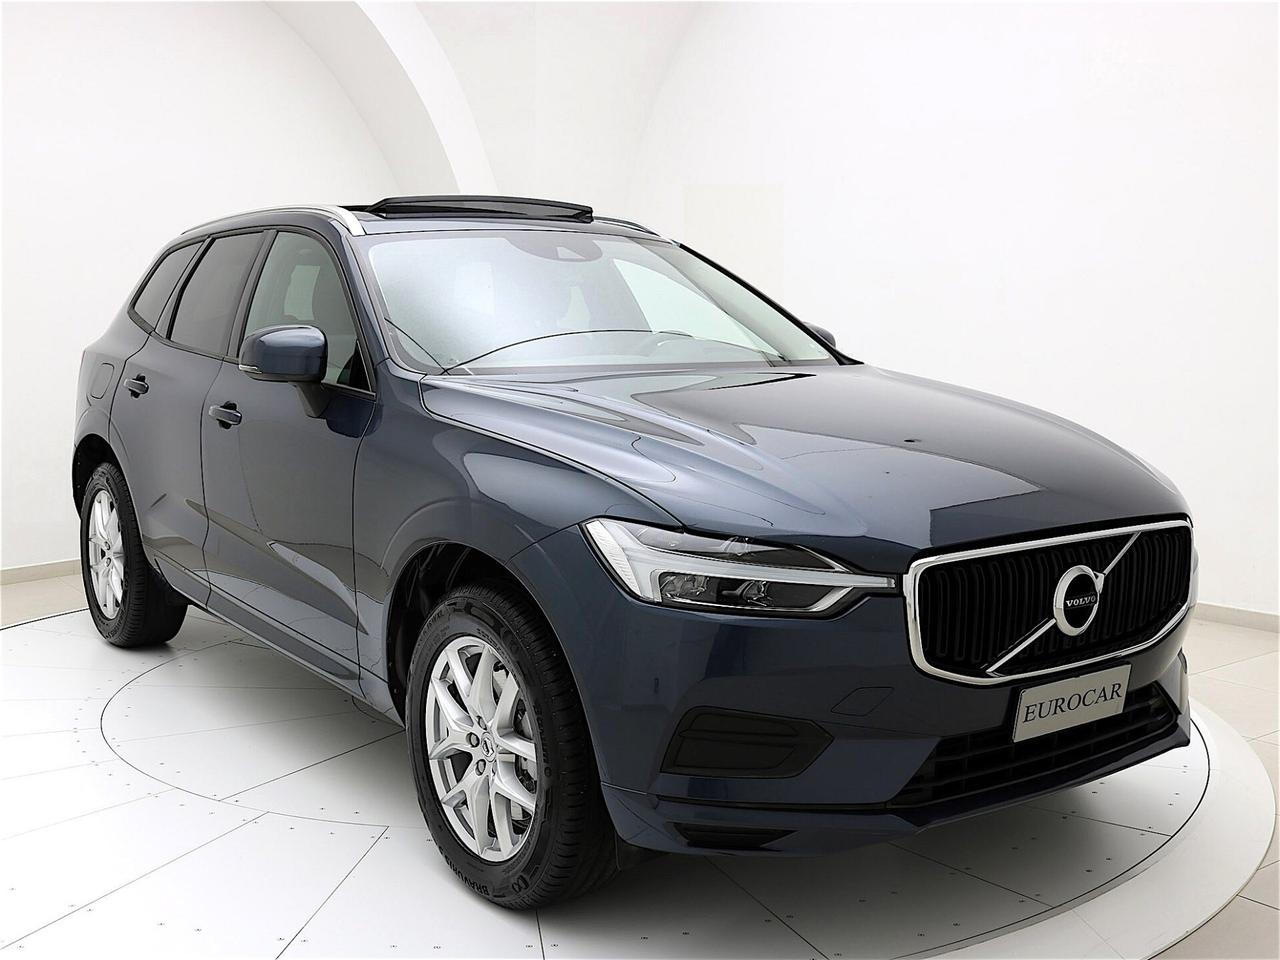 Volvo XC60 2.0 D5 AWD Geartronic TETTO APRIBILE